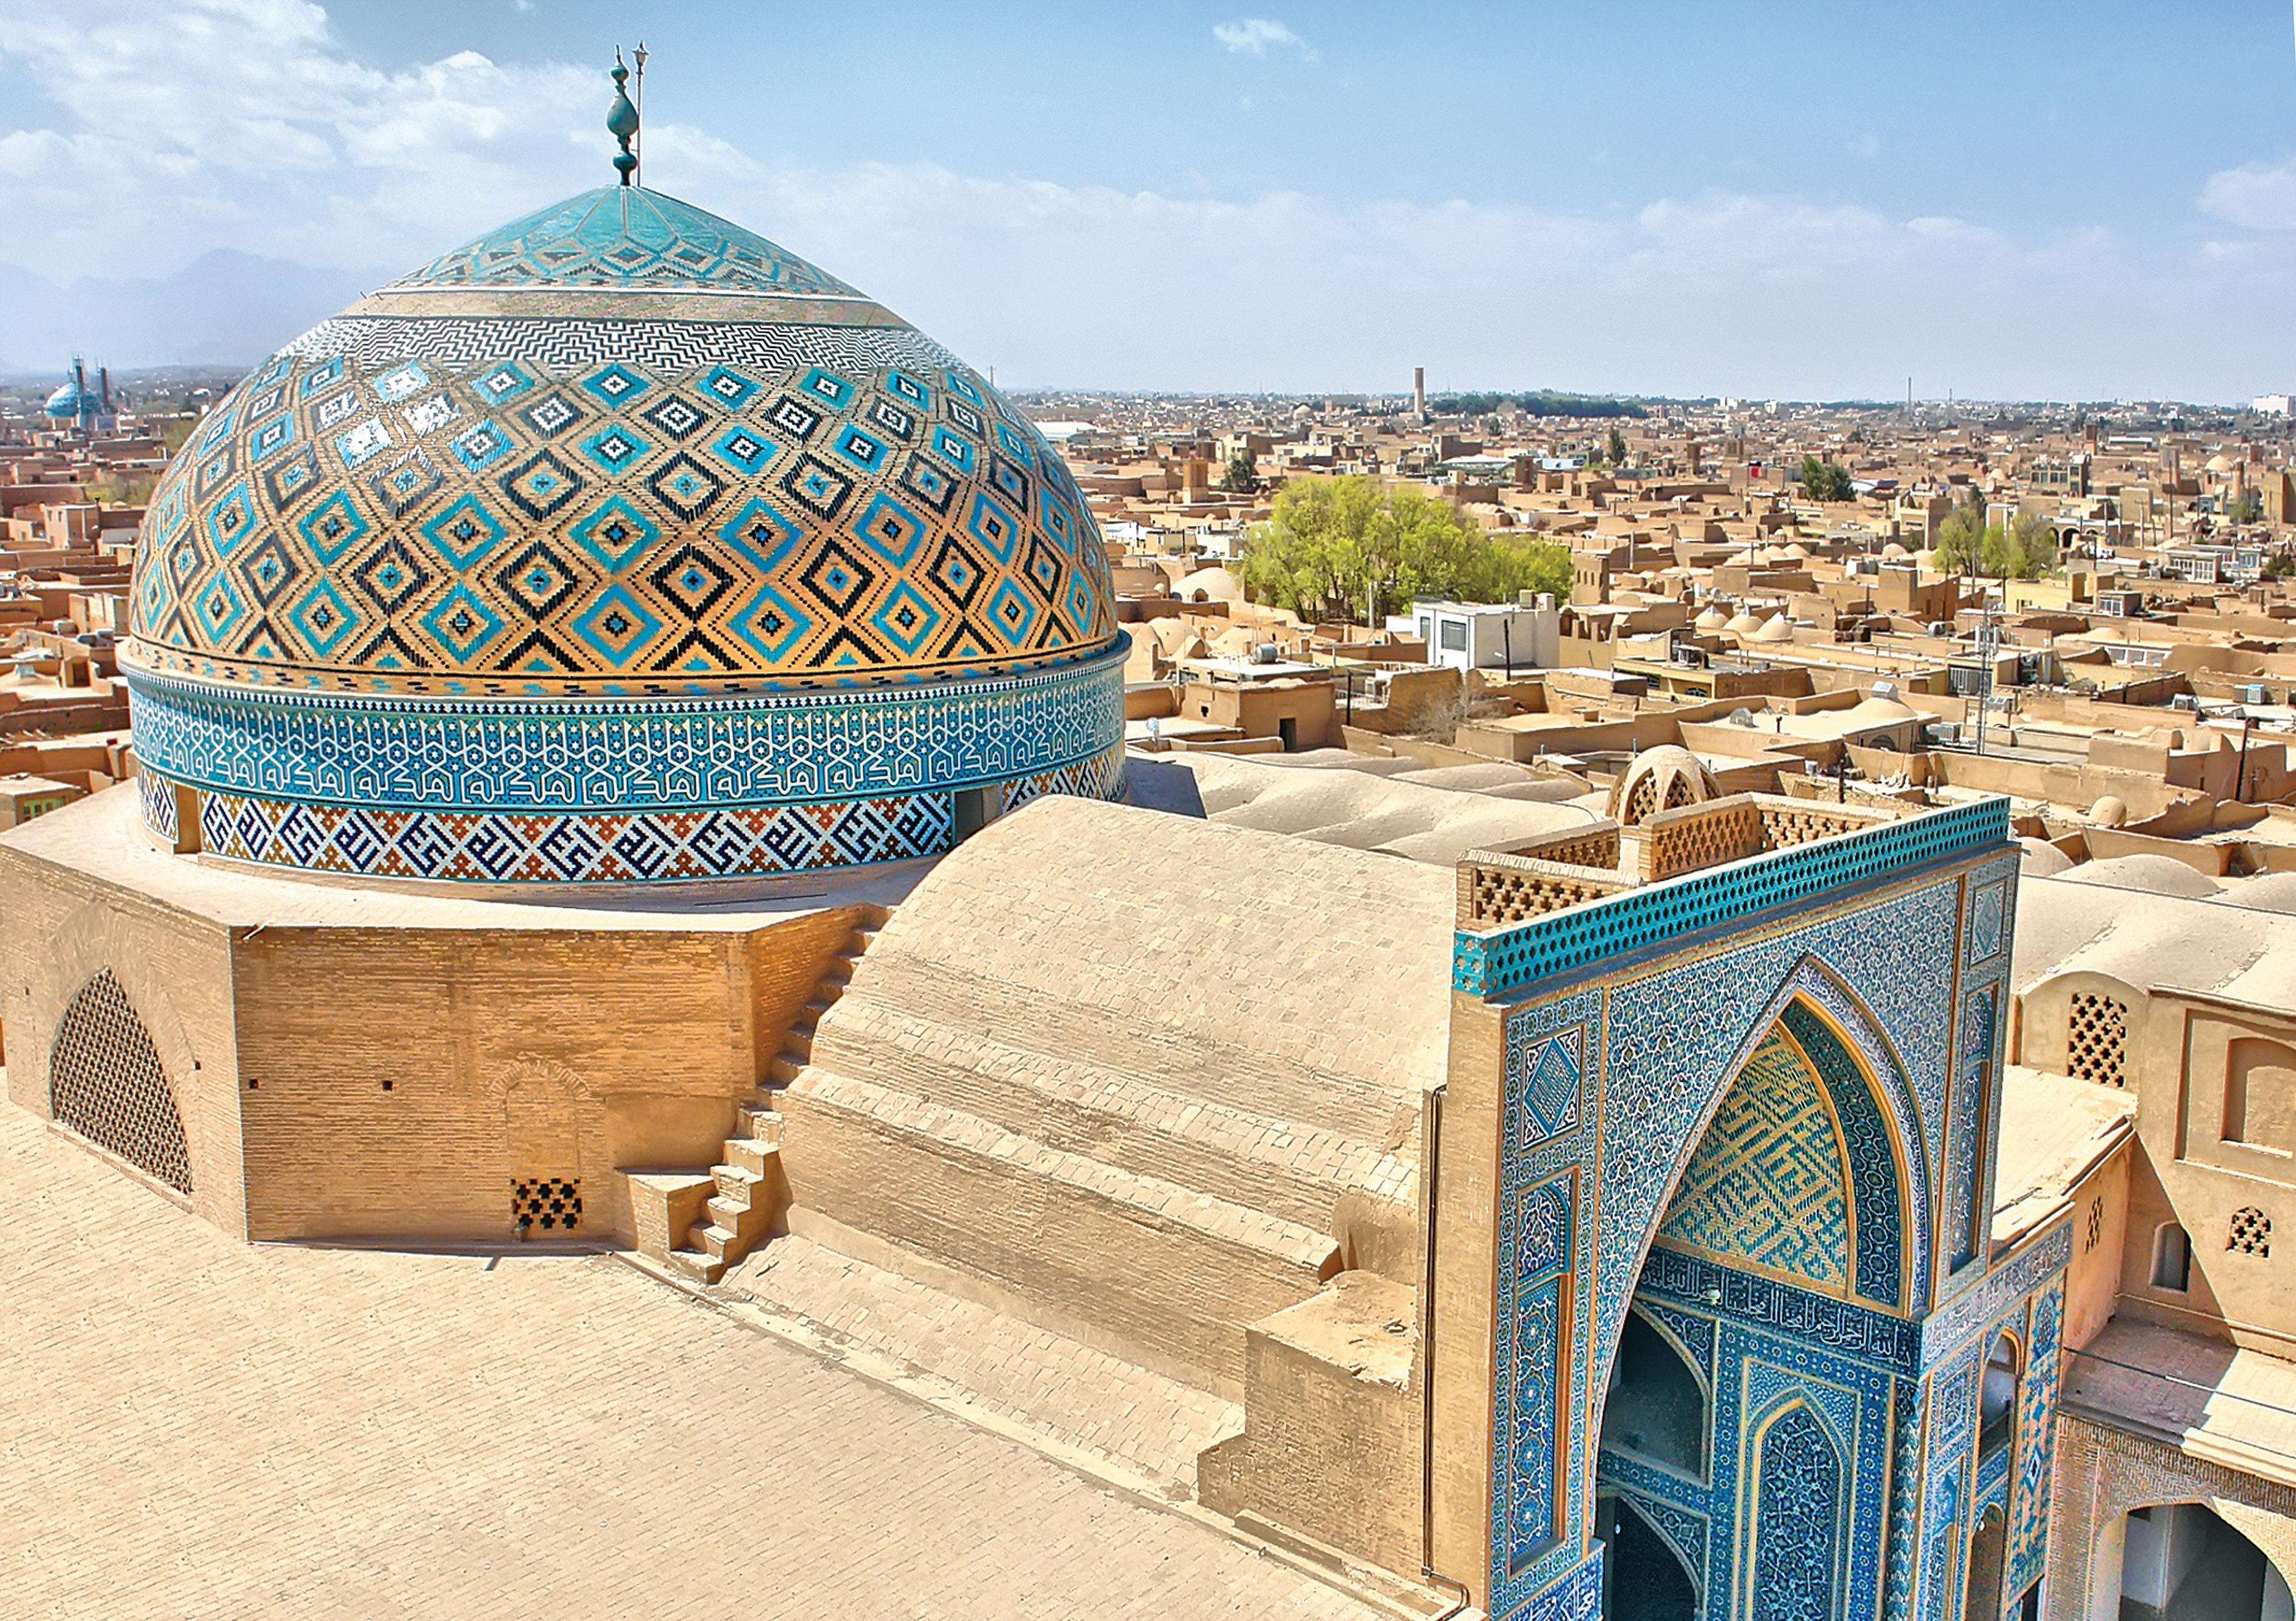 An example of an intricate dome overlooking the city © Amir Reza Moinfar / Shutterstock